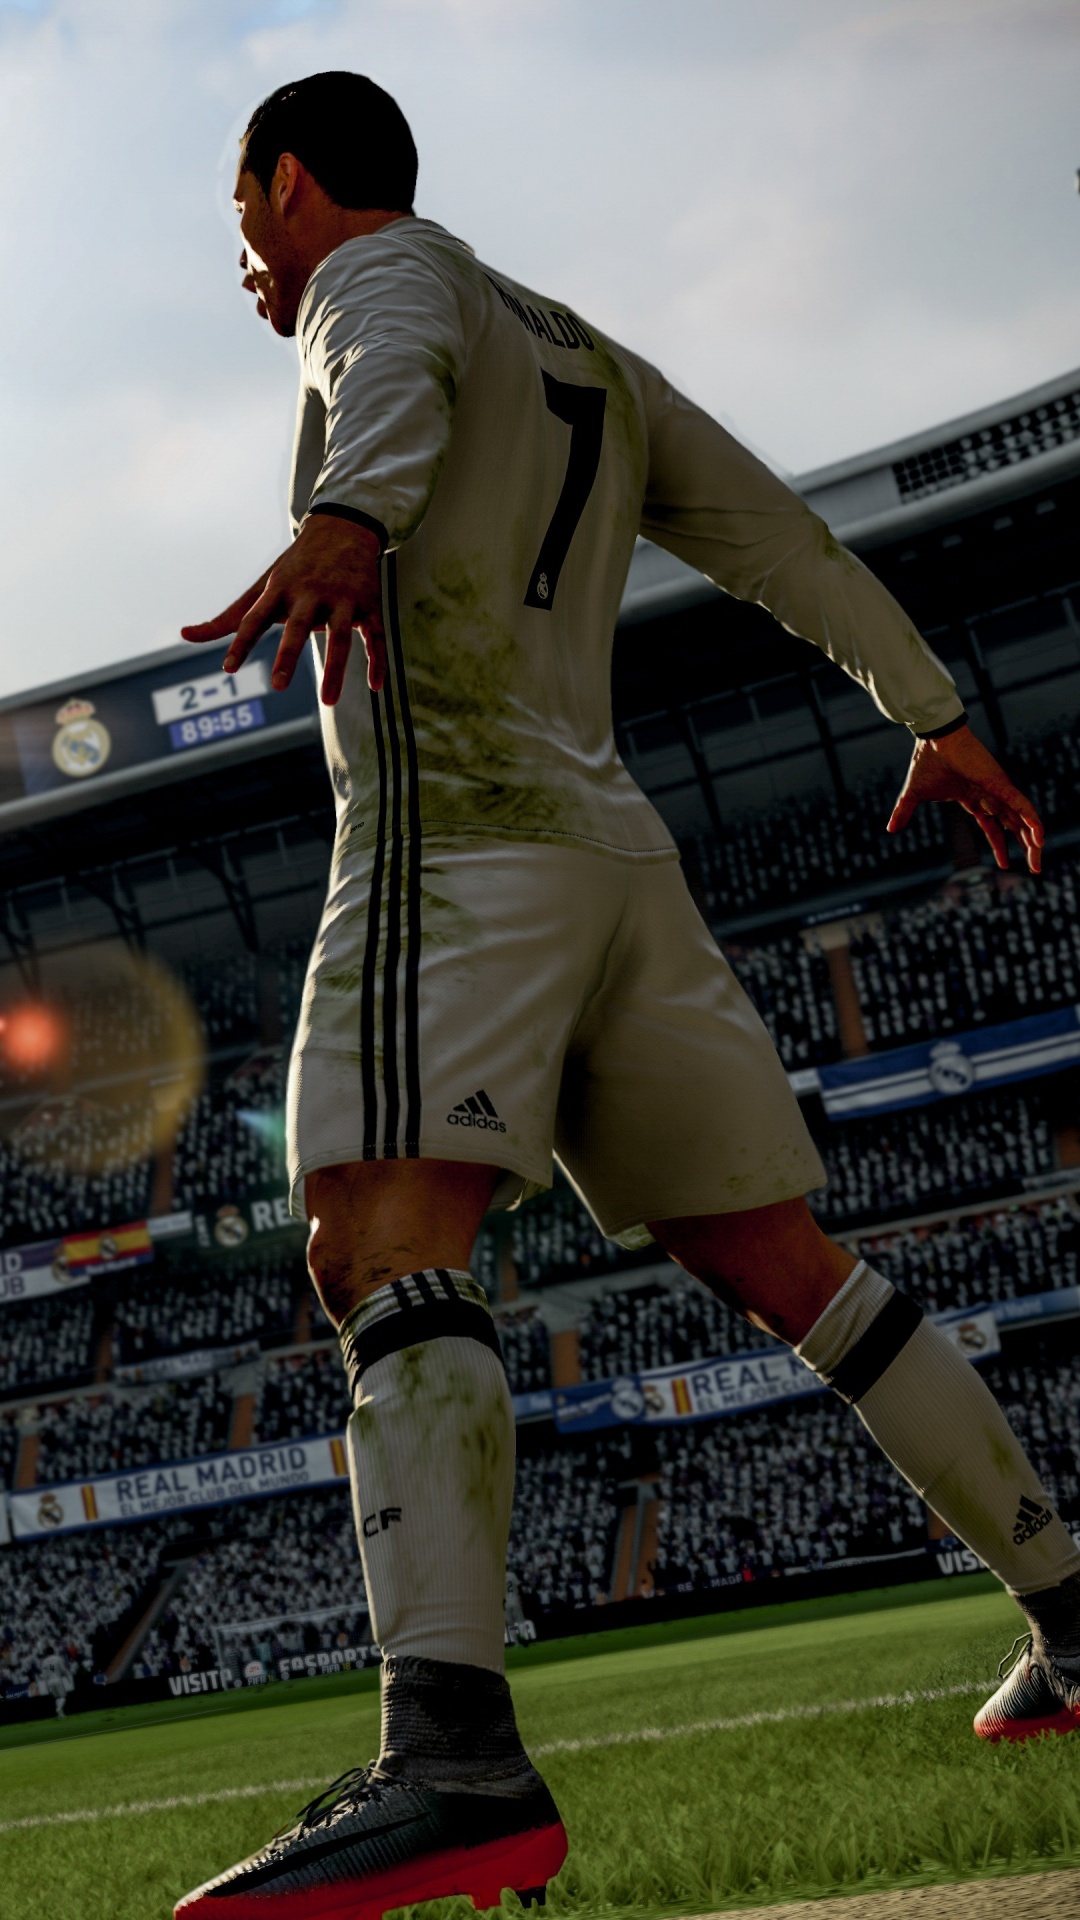 FIFA 18, ea Sports, Electronic Arts, Sports Venue, Stadion. Wallpaper in 1080x1920 Resolution